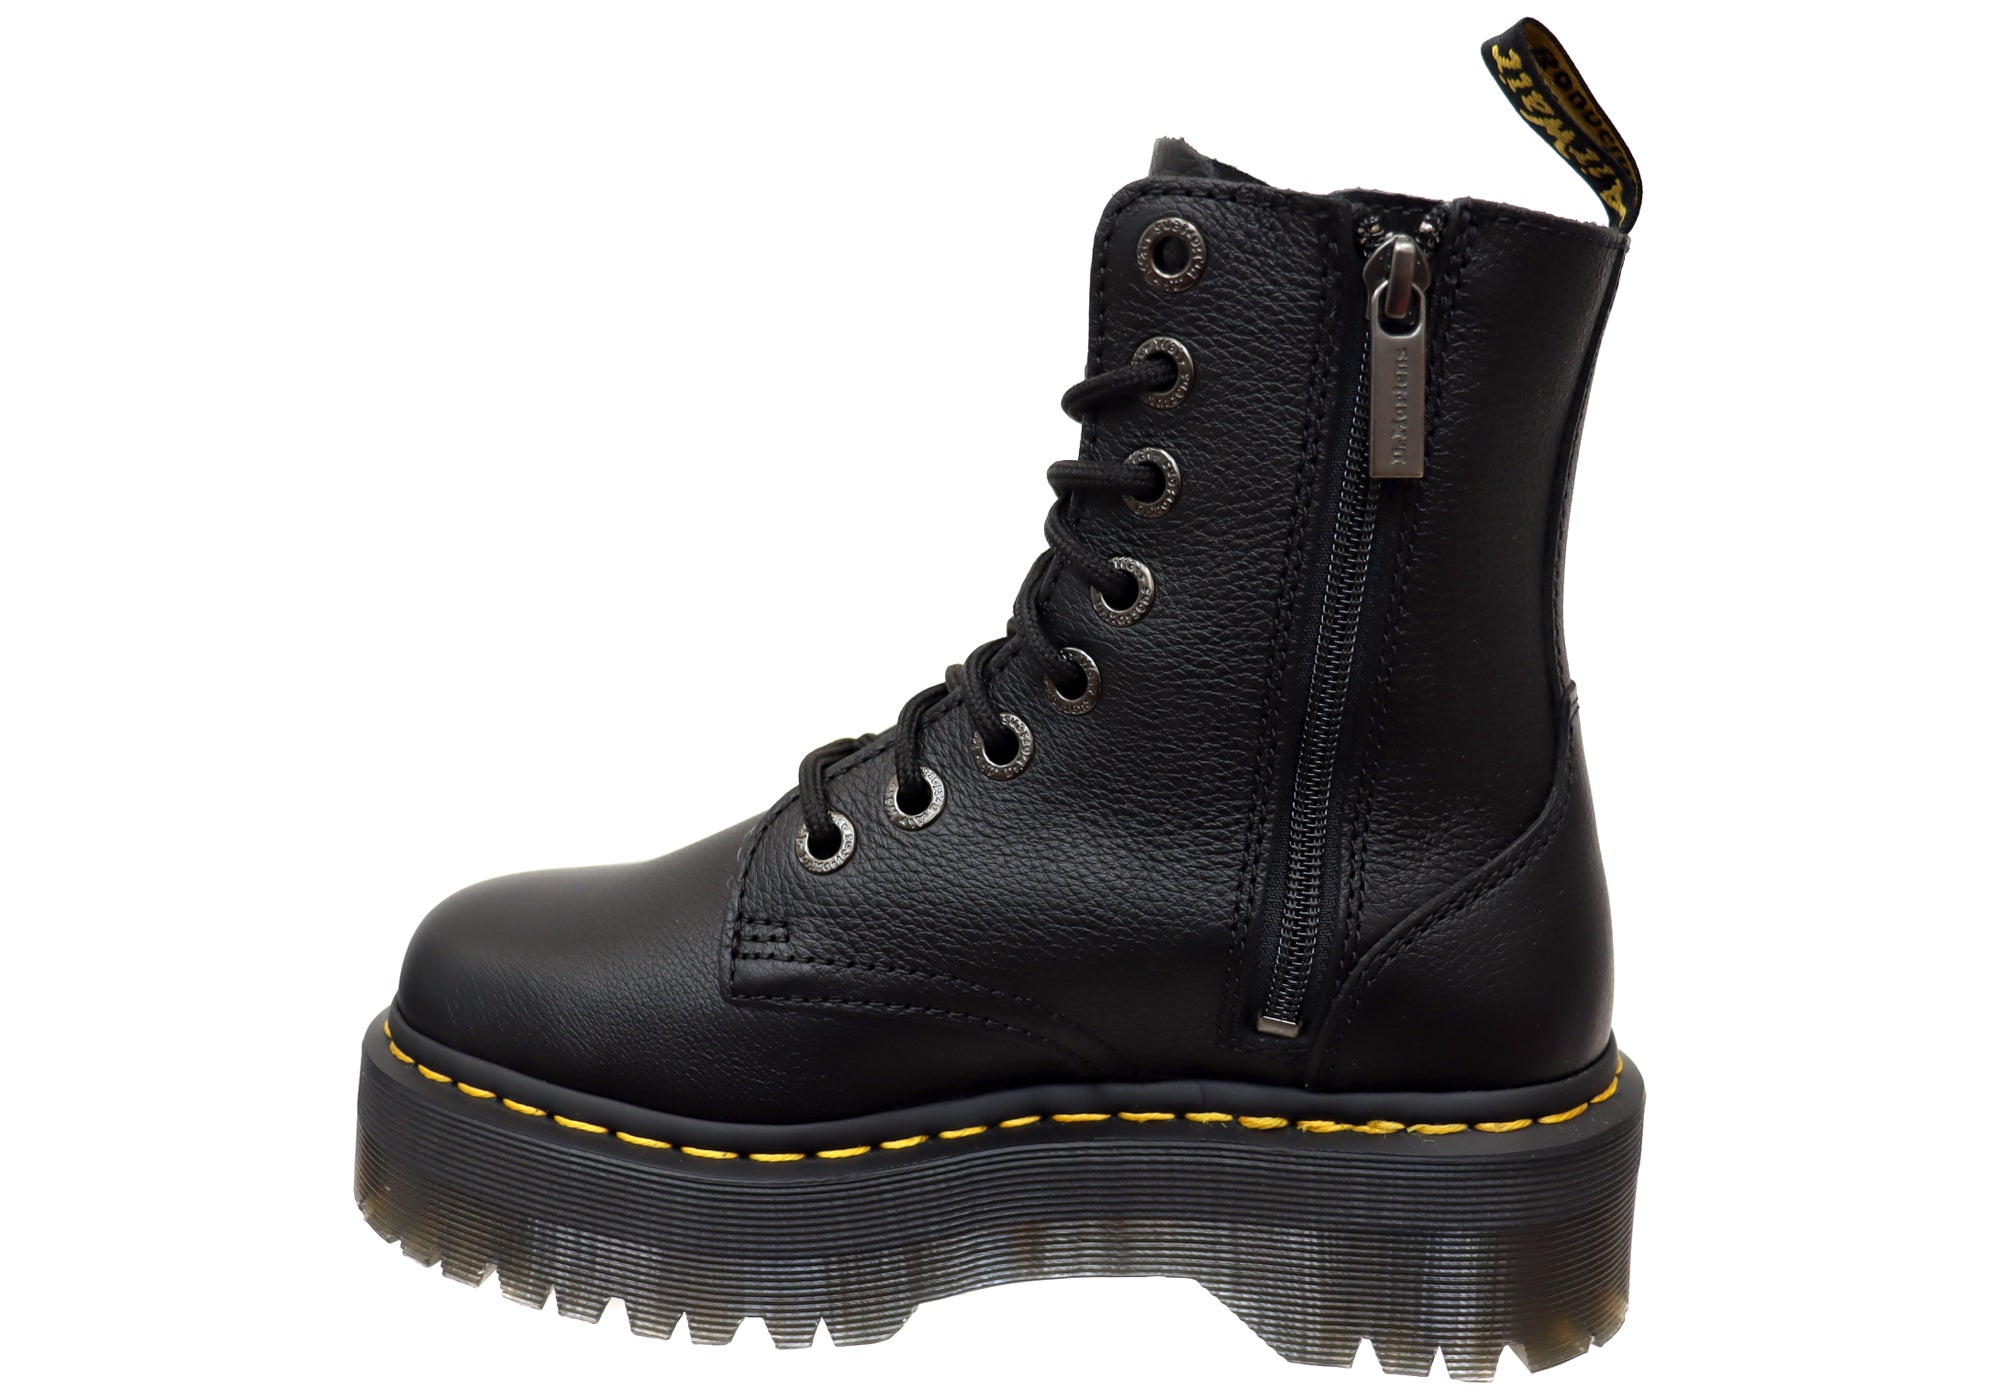 Dr Martens Jadon III Pisa Womens Fashion Lace Up Leather Boots